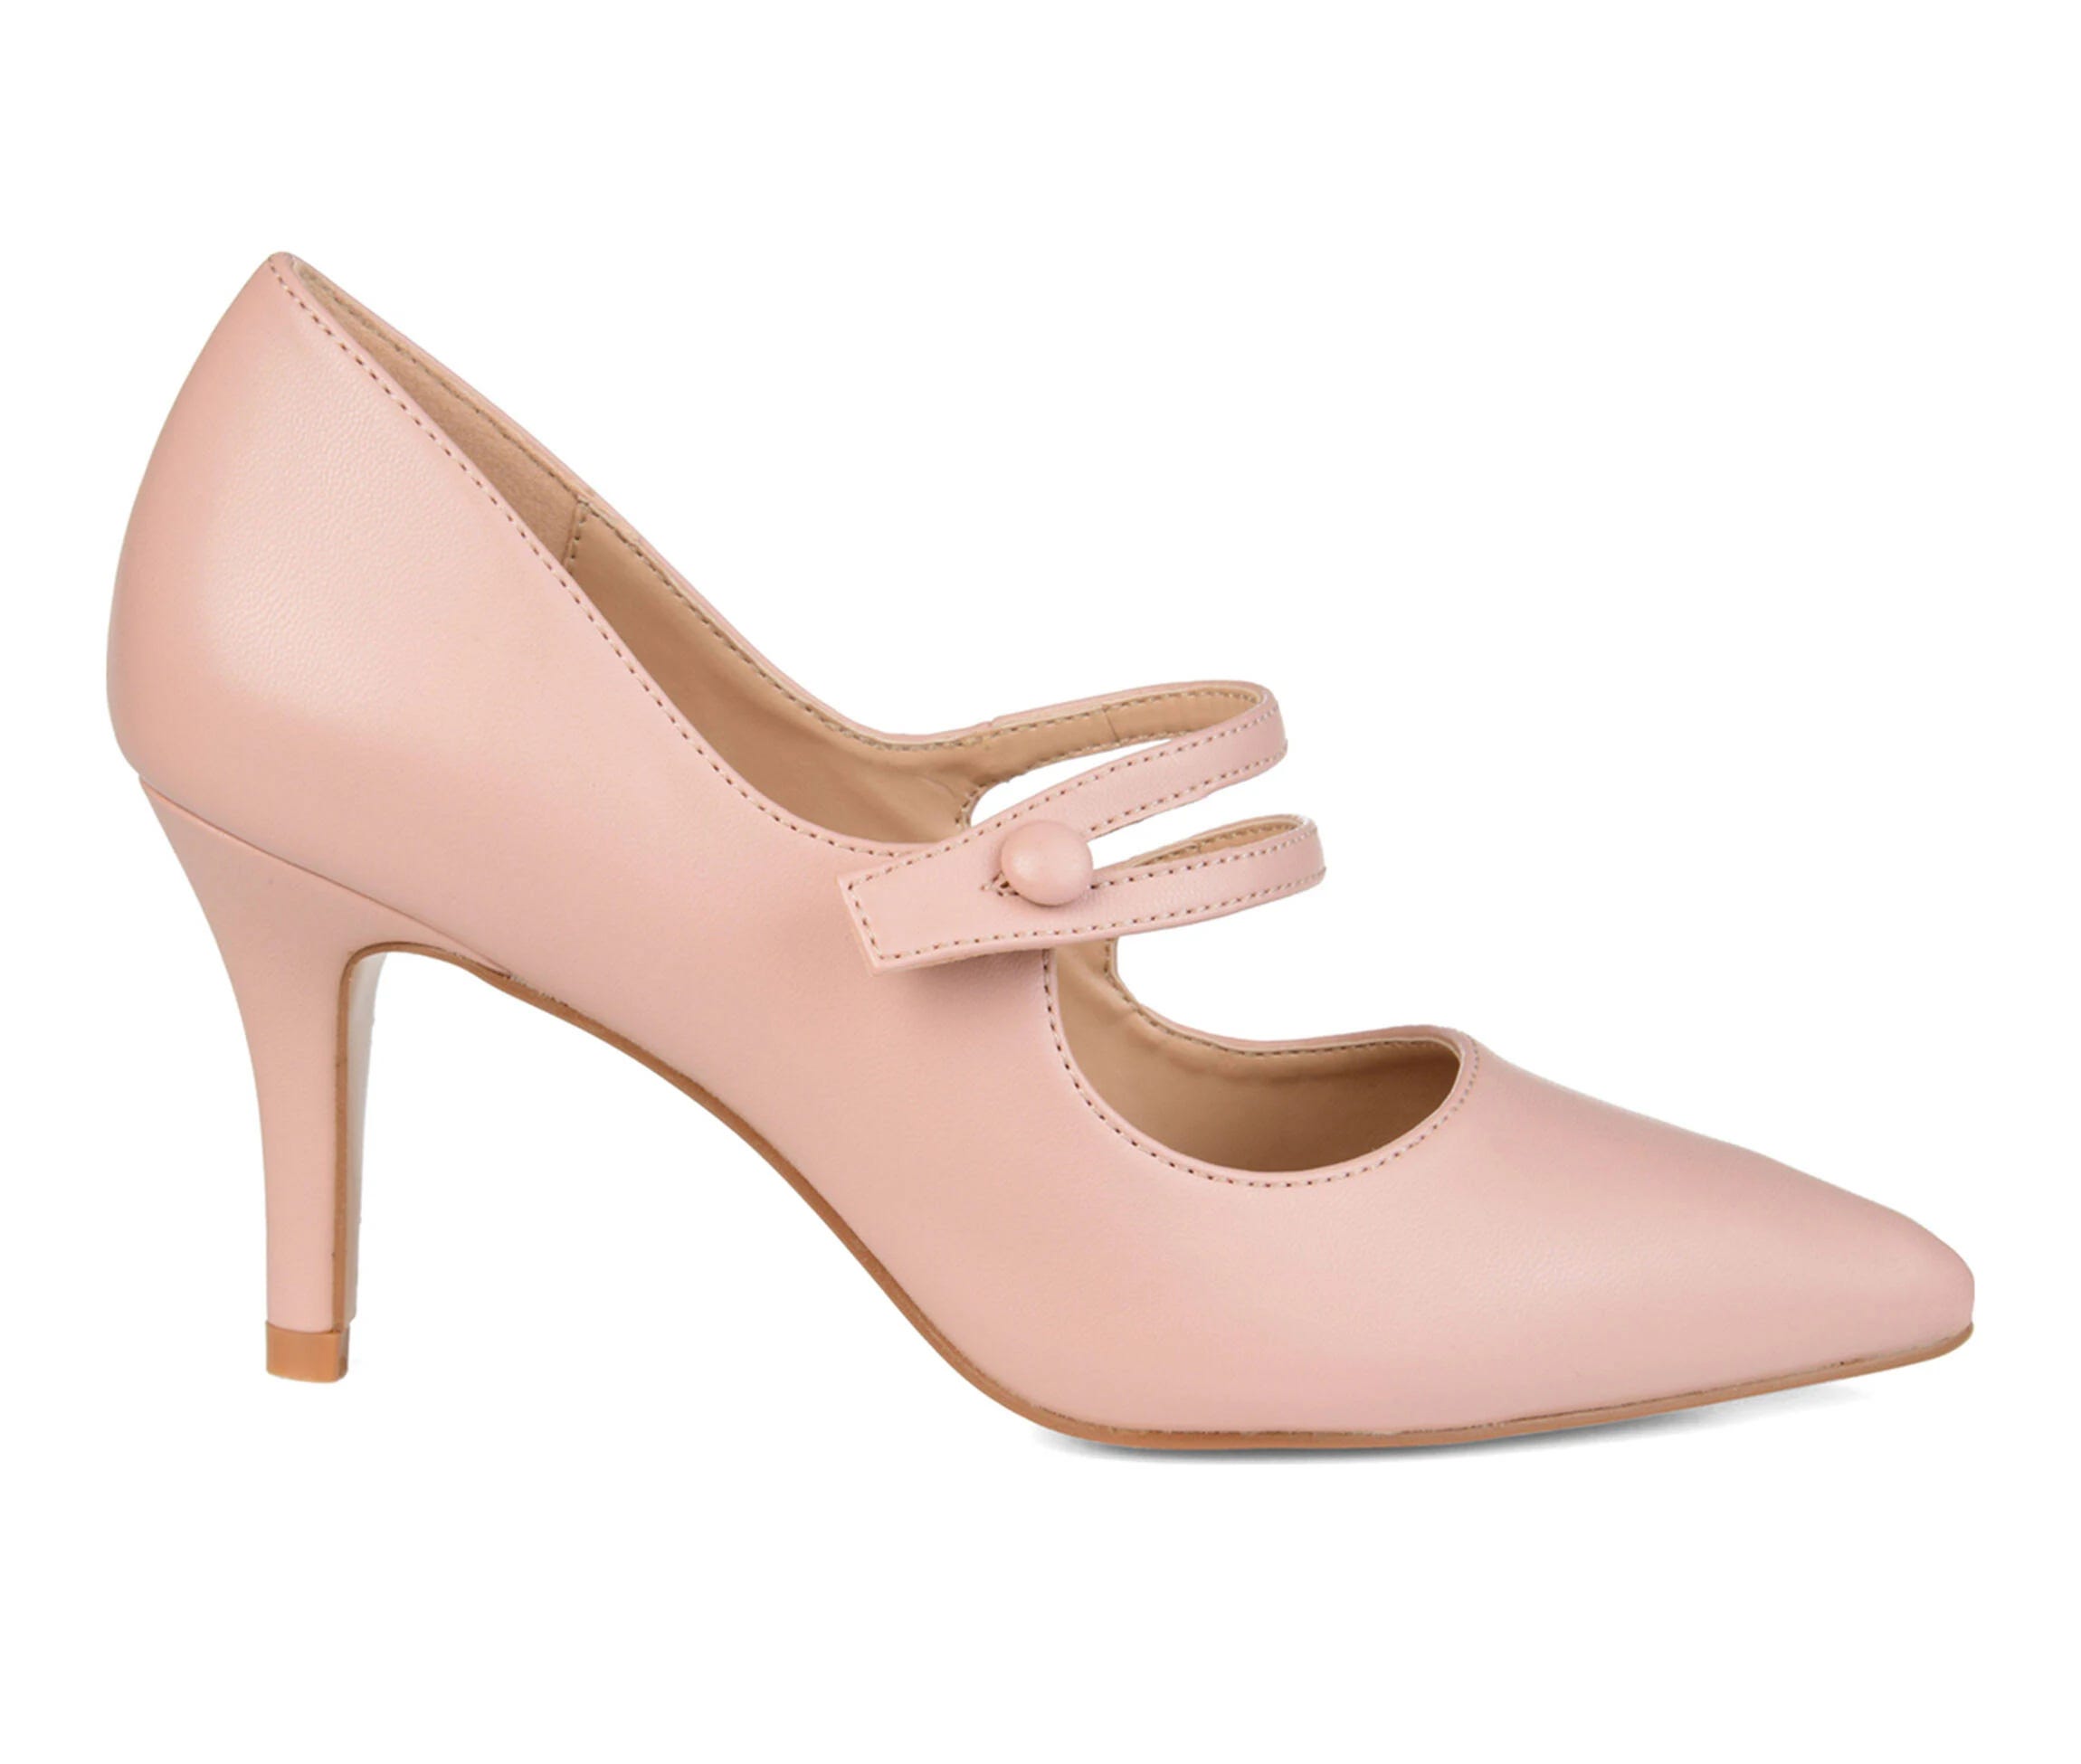 Comfortable Pink Pointed Toe Heels by Journee Collection | Image